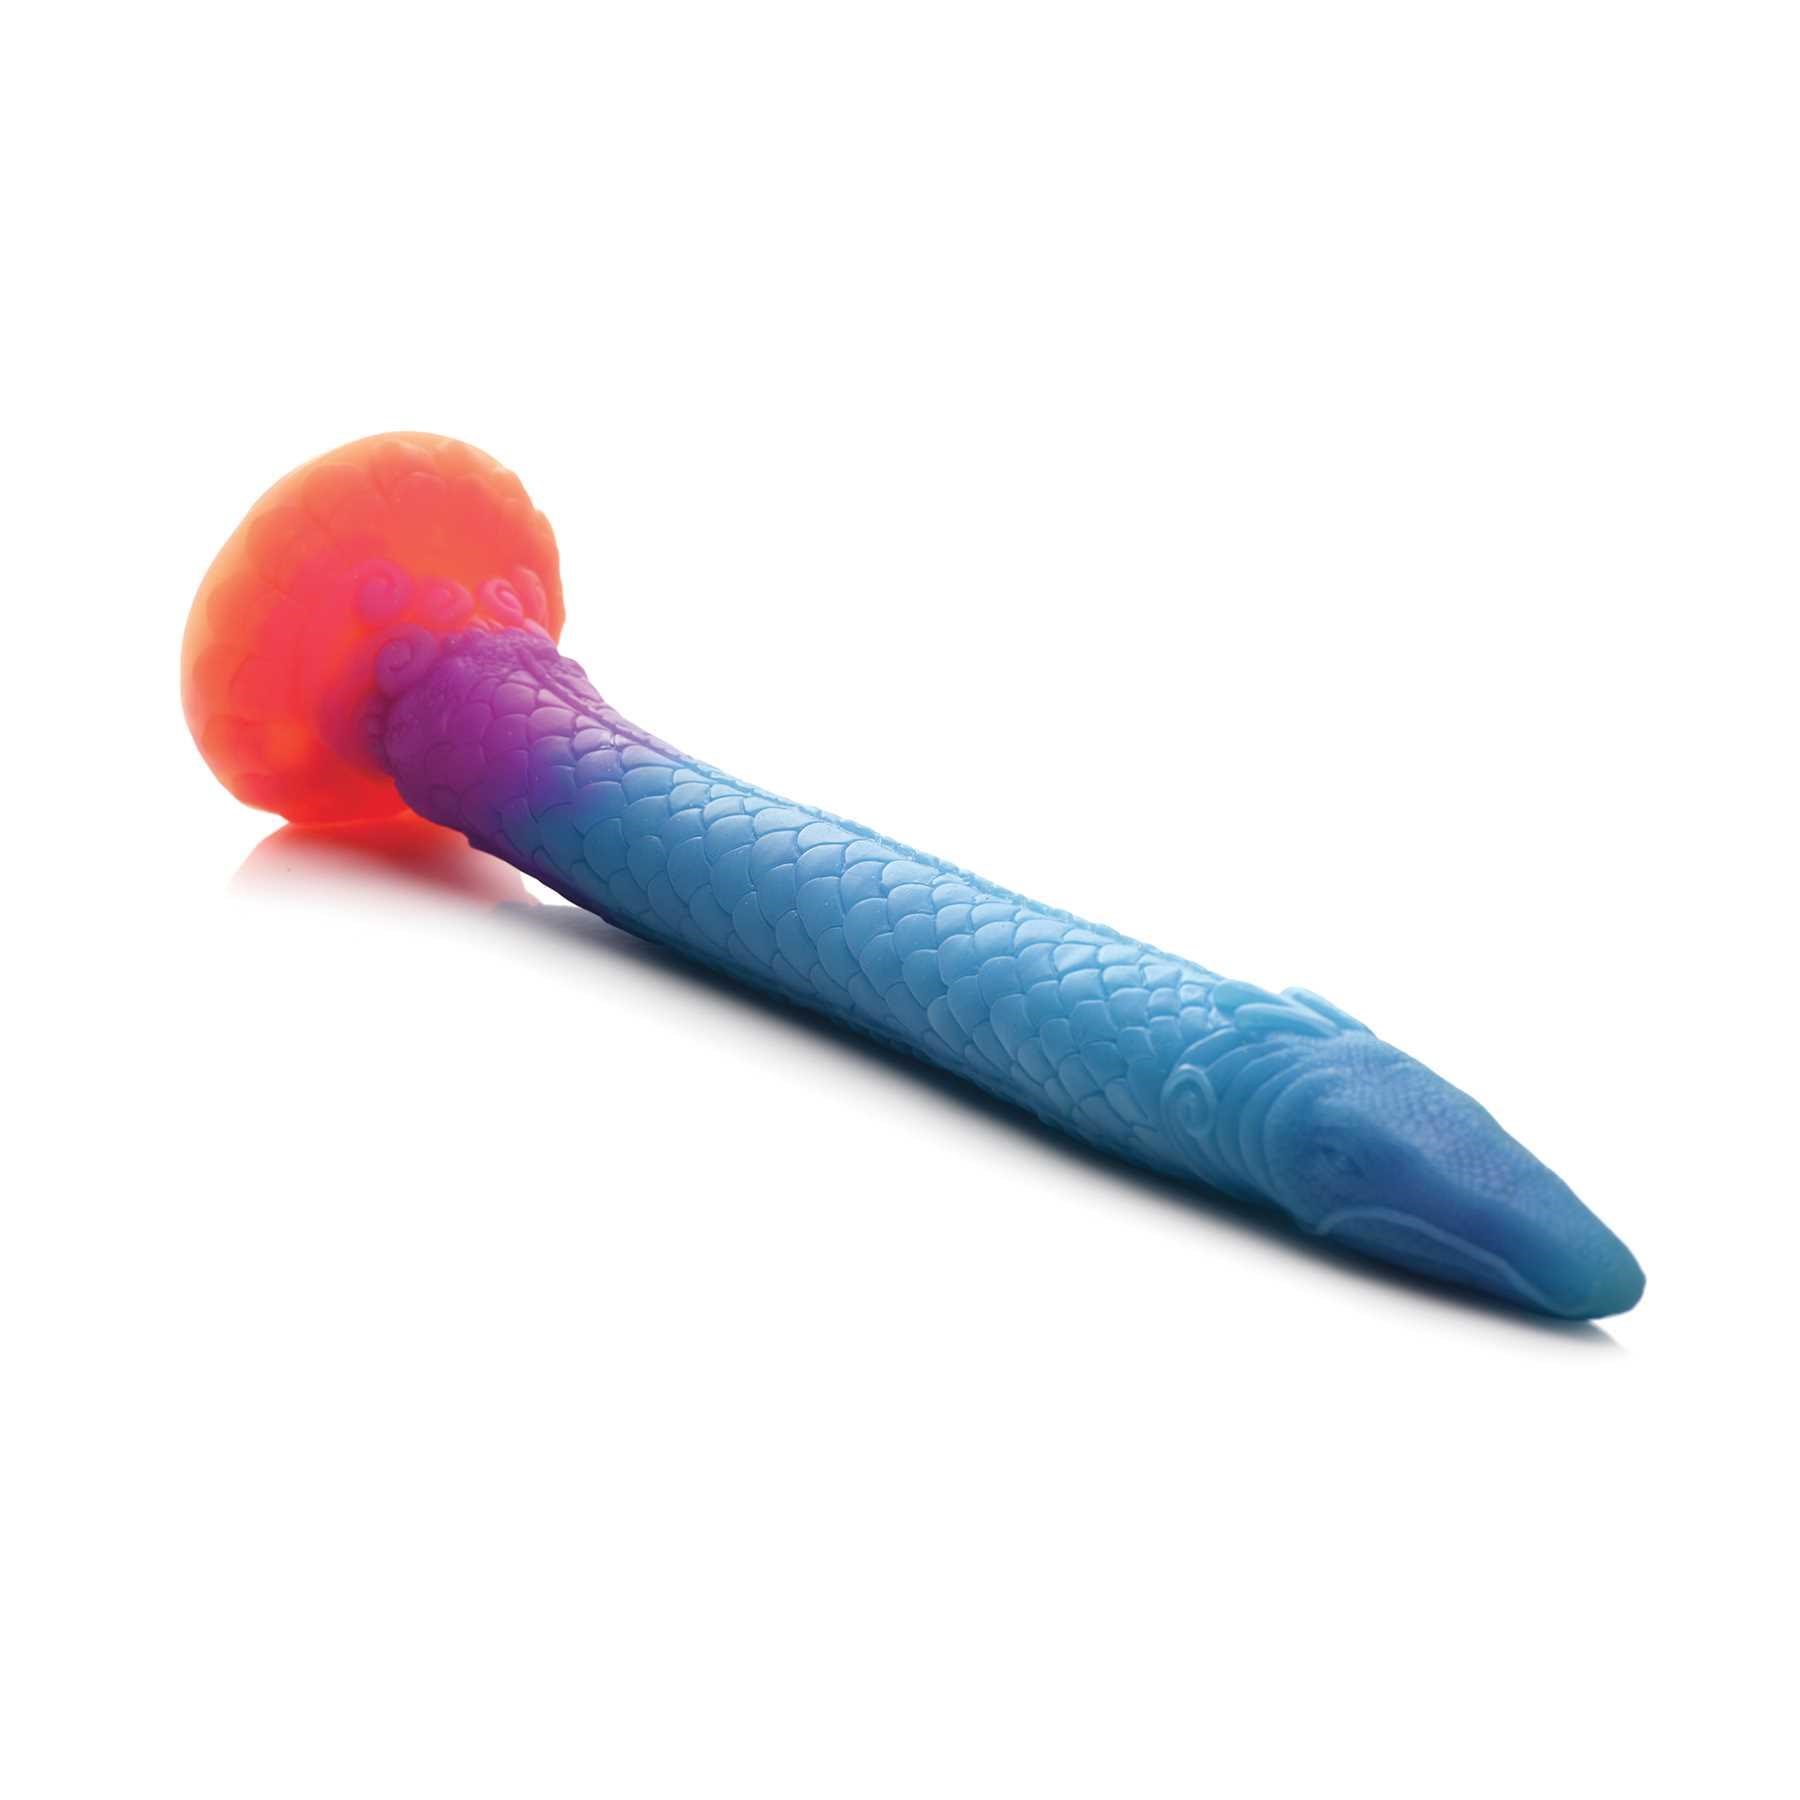 Mikara - Glow-in-the-Dark Silicone Snake Dildo laying on a table